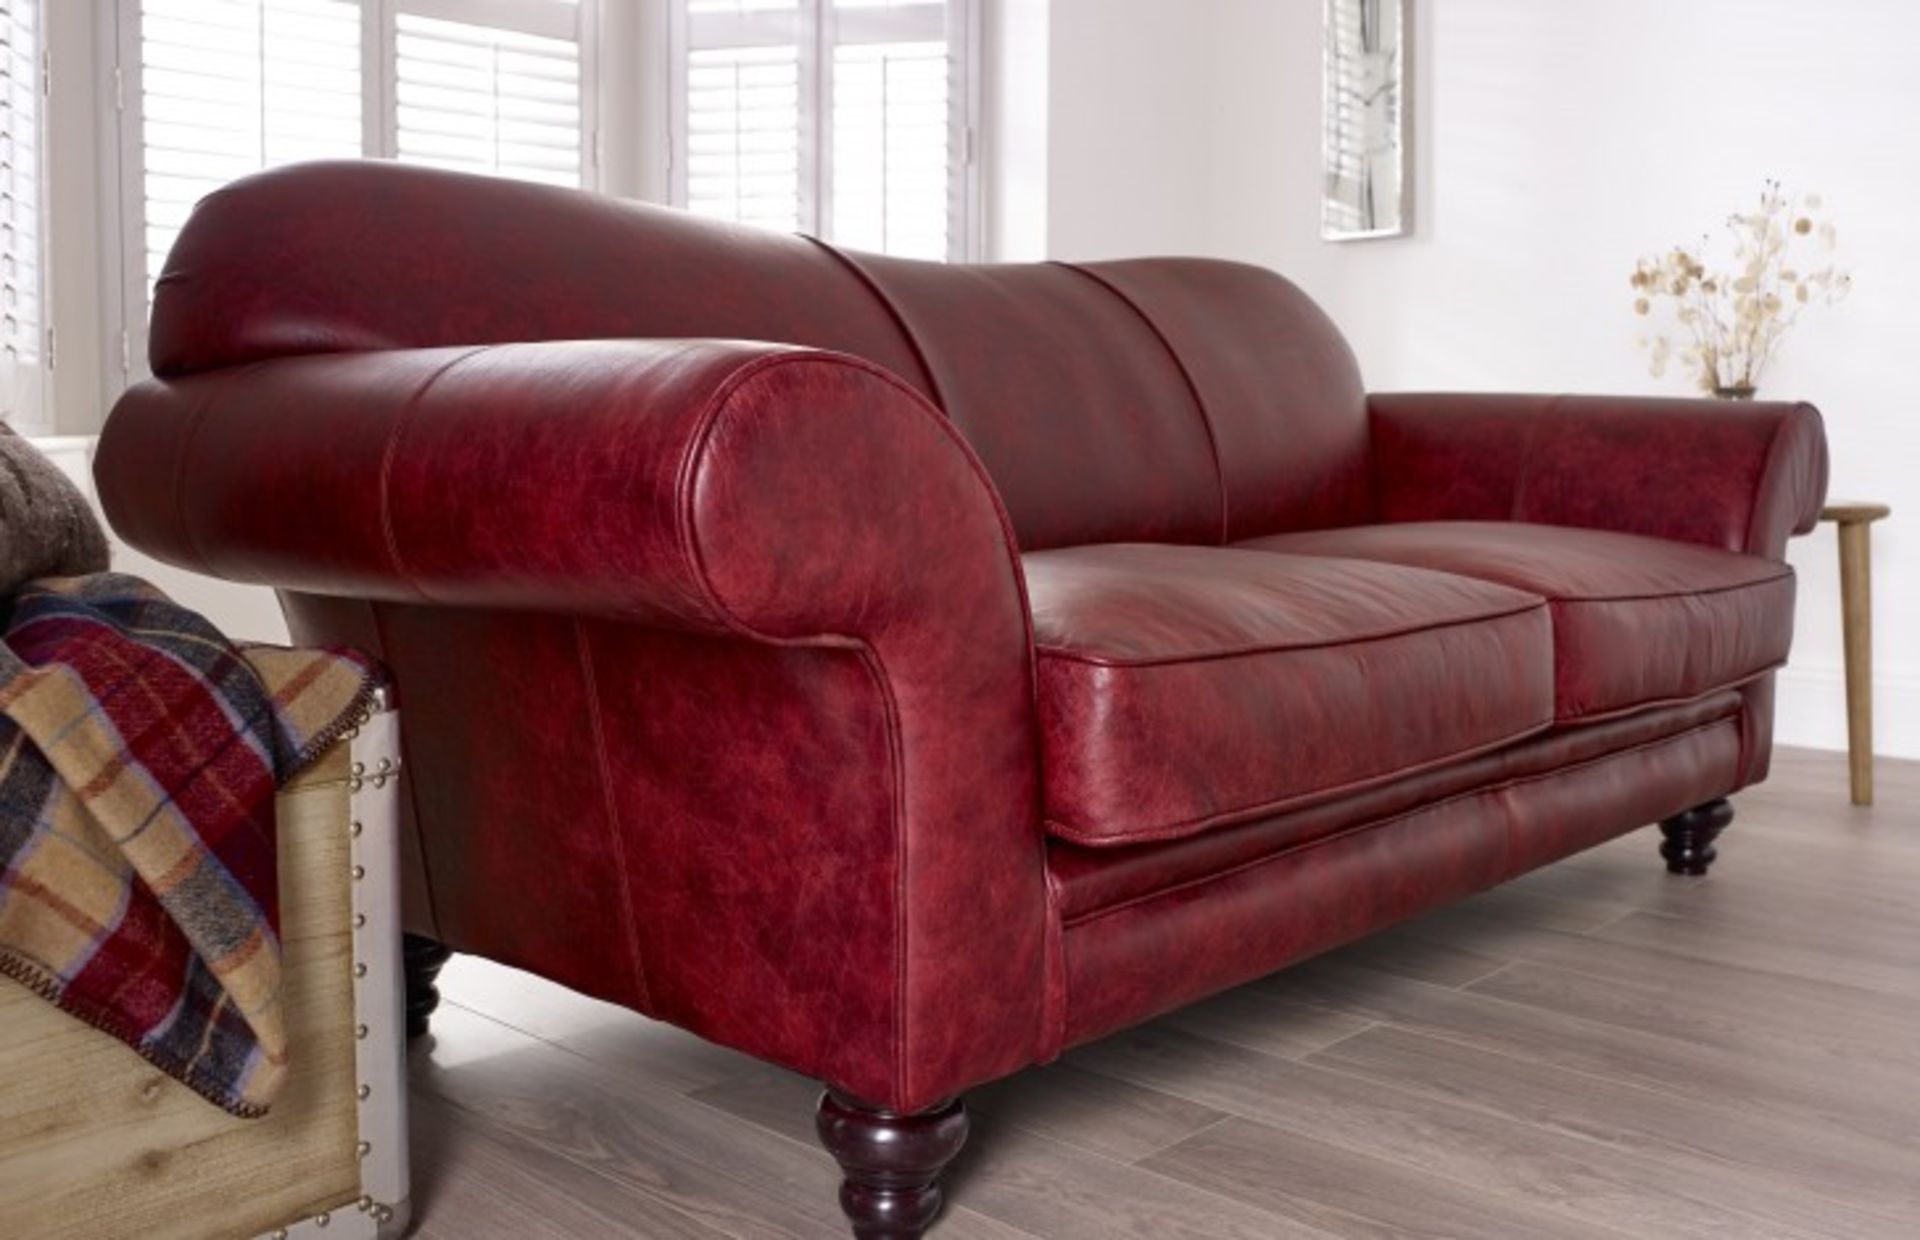 Eton 3 Seater Tobacco Leather Curved Sofa A Beautiful Narrower Depth Sofa A Contemporary Twist On - Image 2 of 3